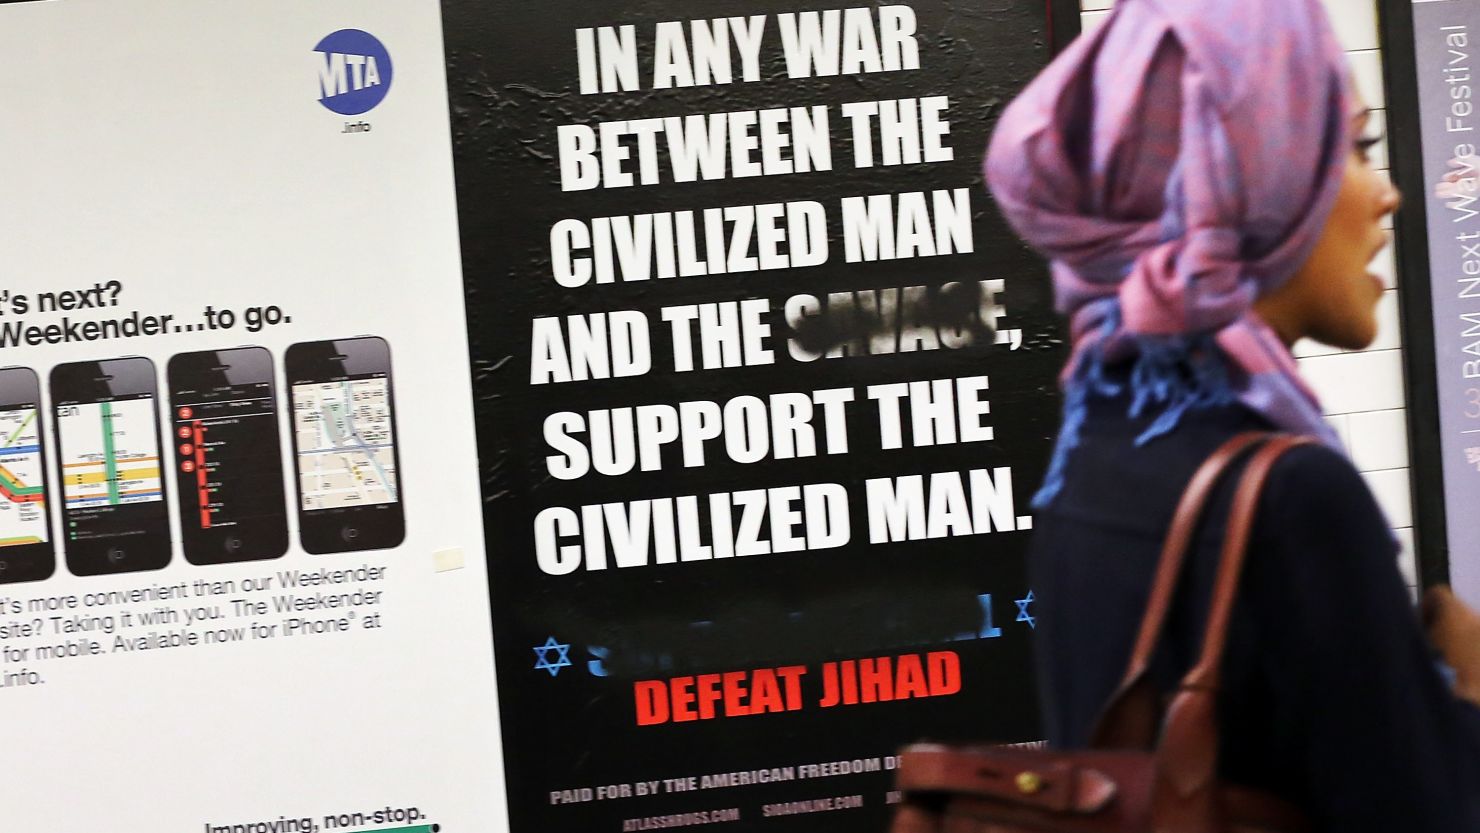 A woman walks by a controversial ad in a New York subway station last fall. The word "savage" had been defaced.